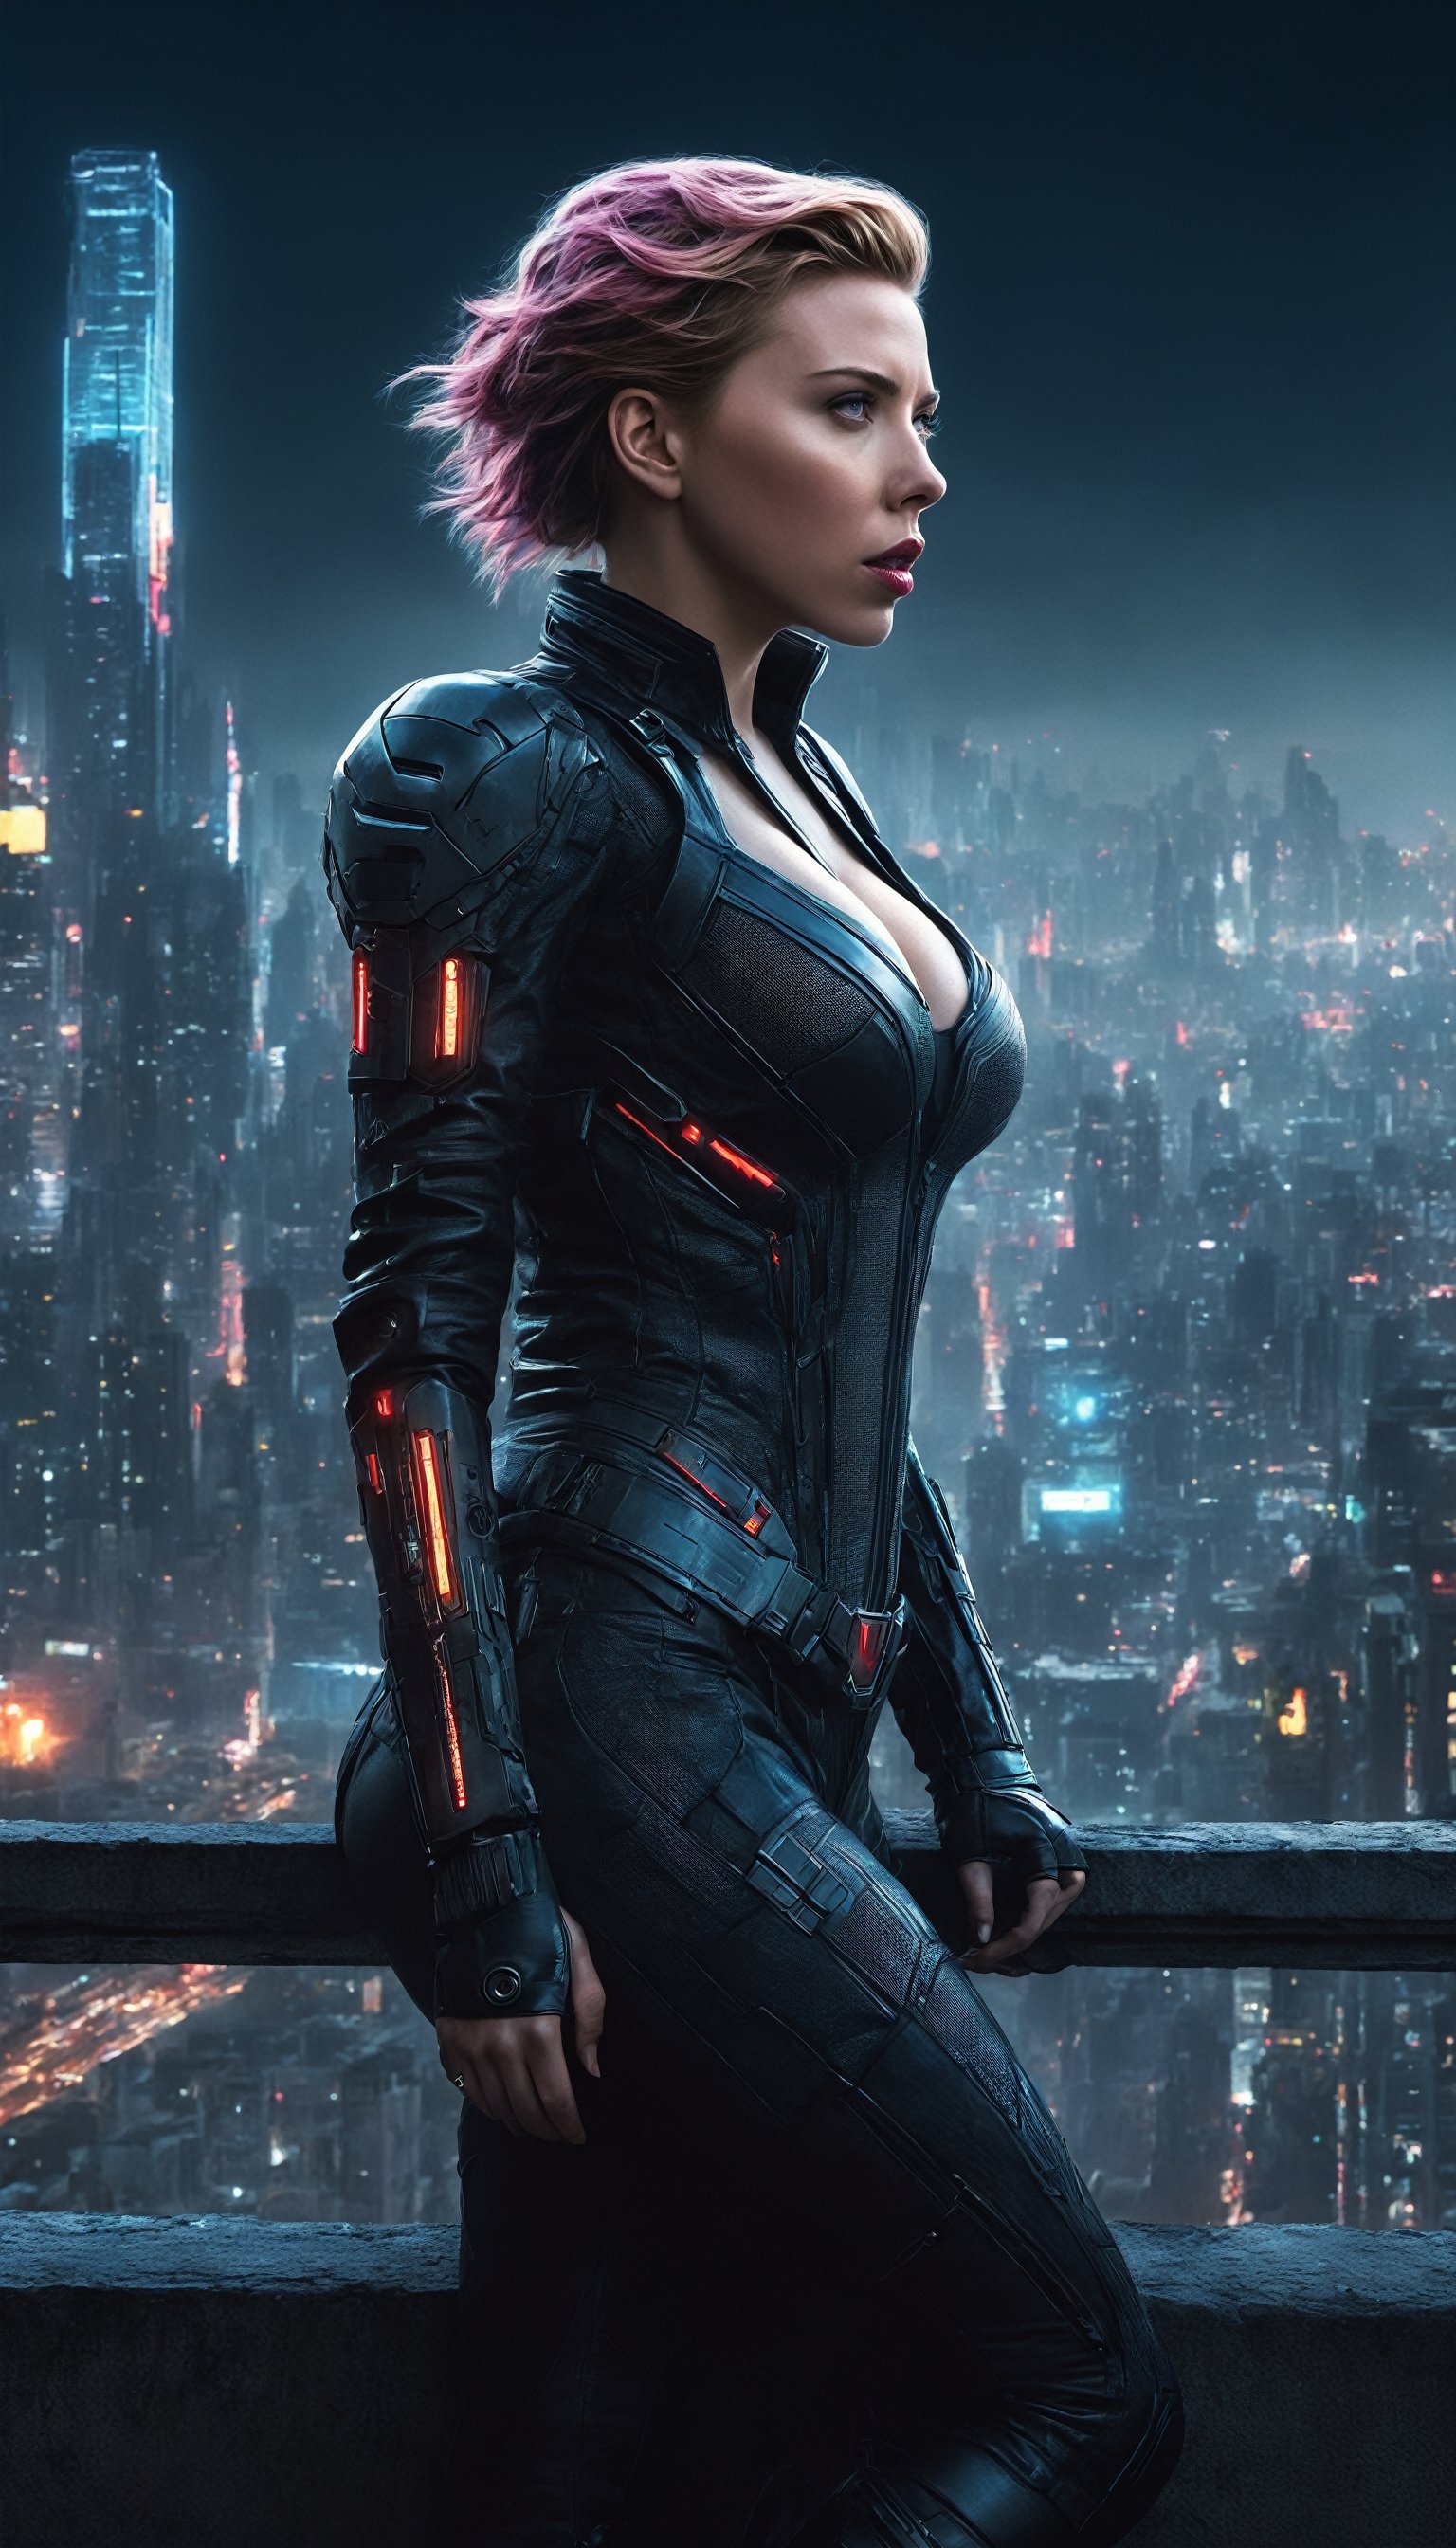 Within a surreal, nanopunk metropolis (perpetual twilight:1.2), Scarlett Johansson takes on the role of a cyberpunk femme fatale. Picture her standing on the ledge of a towering building, her silhouette against the eternal twilight. The scene is a masterpiece of ultra-realism with a dramatic lighting scheme, casting an eerie, underexposed glow. Capture the intricate details of Scarlett's attire and the cyberpunk elements of the cityscape in HDR, creating an image of infinite ultra-resolution image quality.